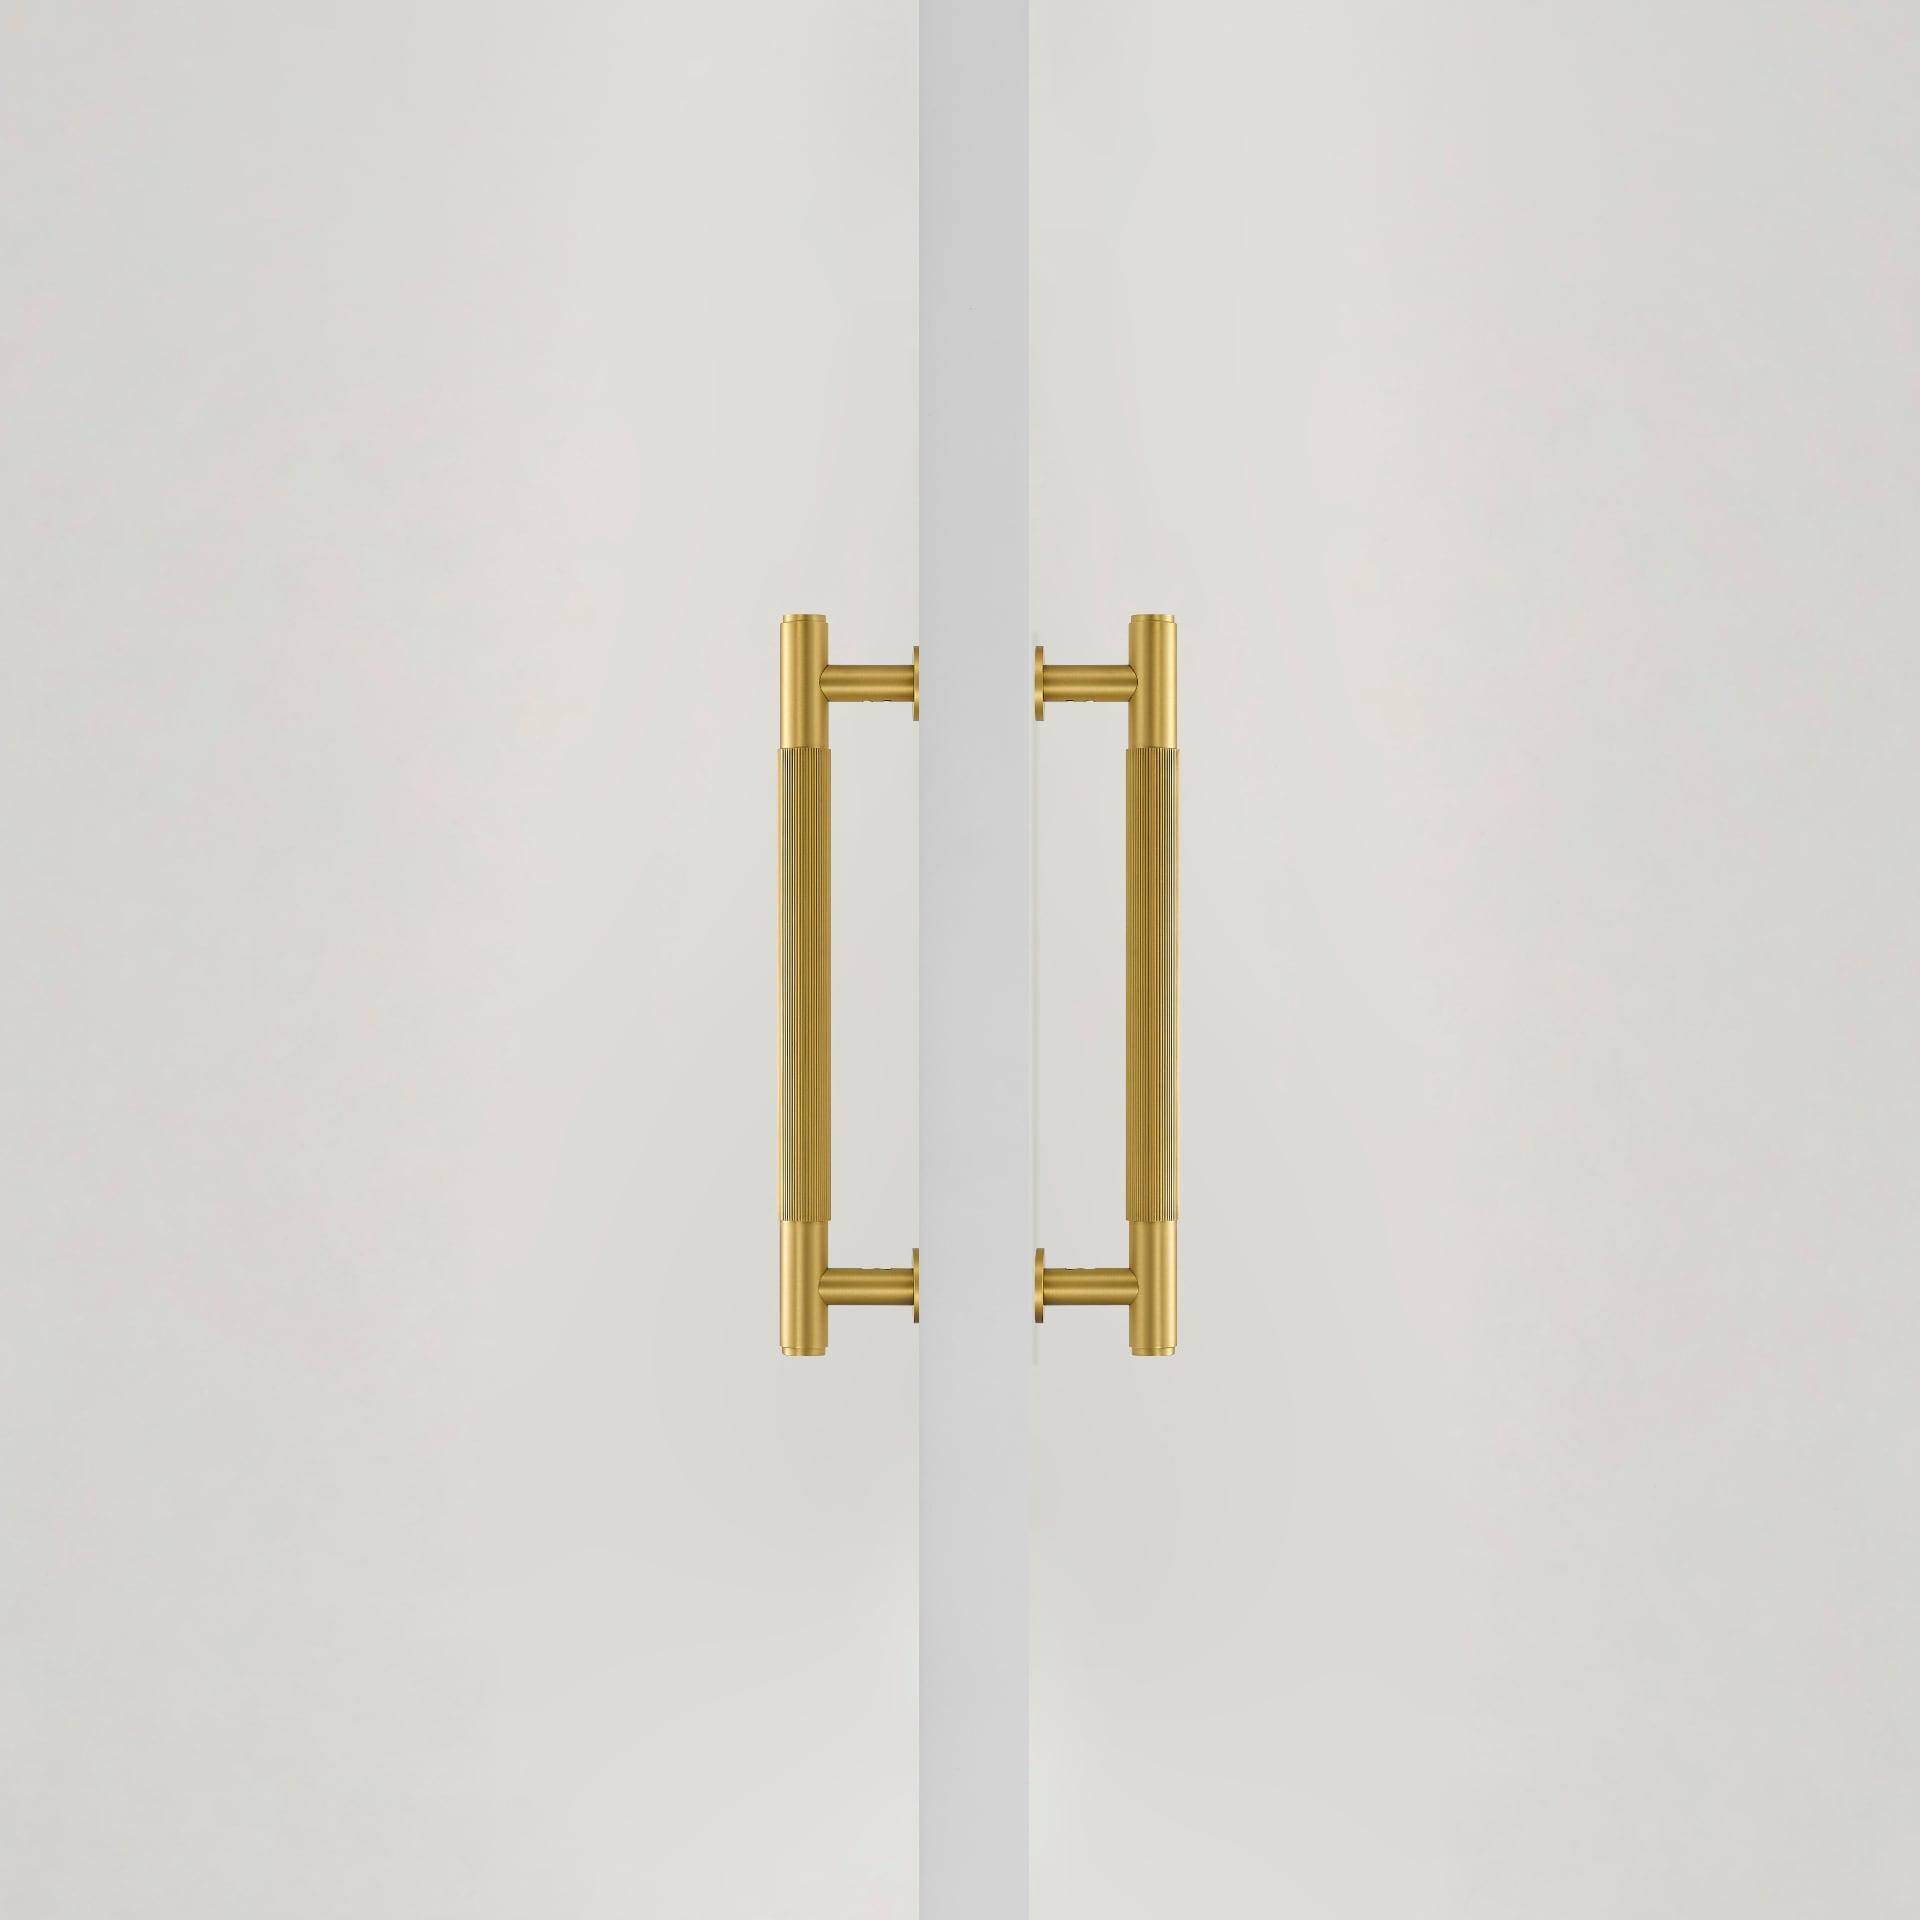 MARBELLA / Double-Sided Solid Brass Knurled Door Pull - Handle Shop Couture 